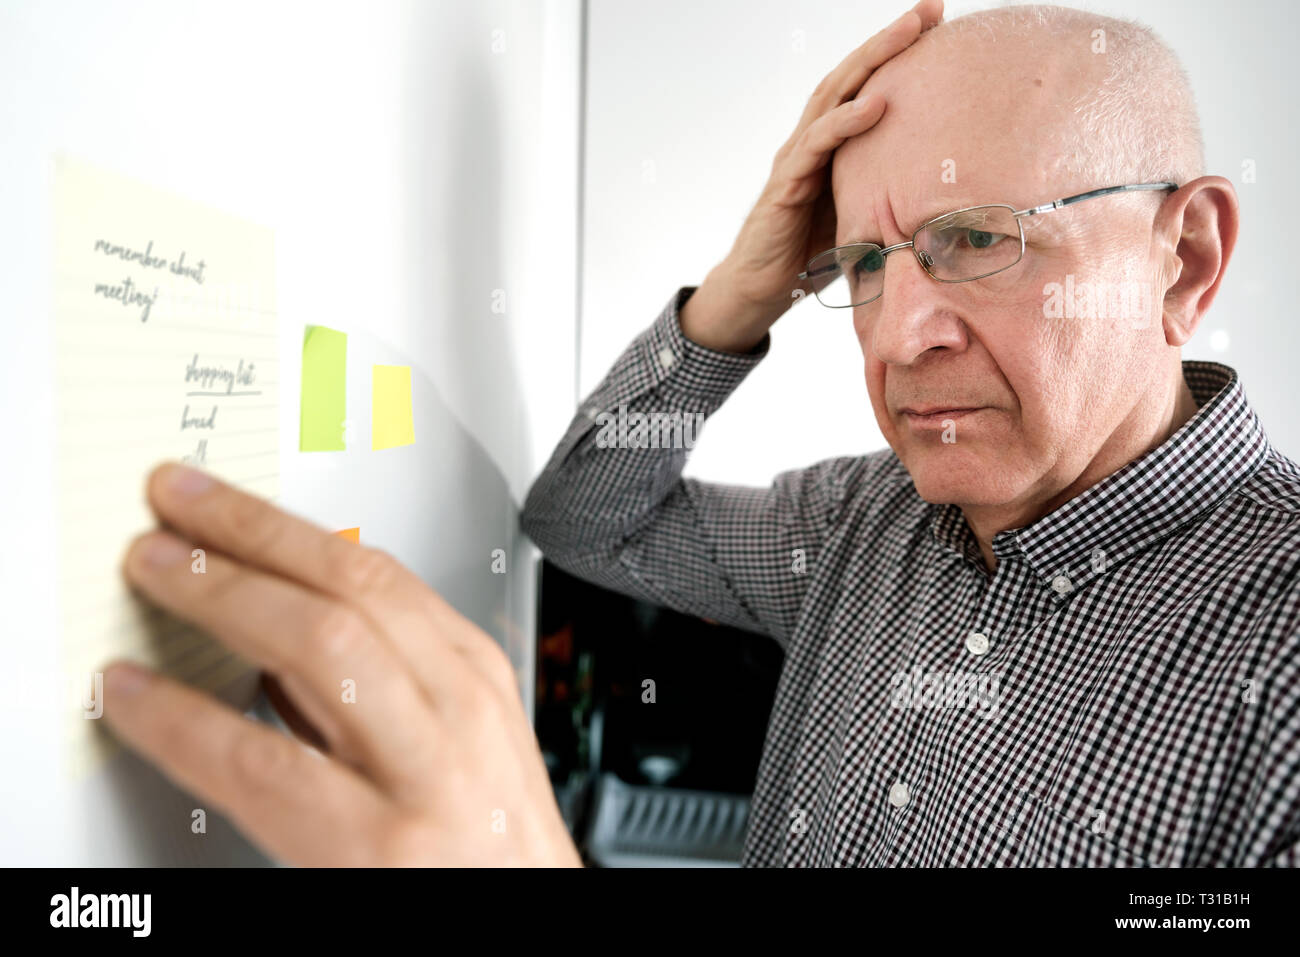 Confused senior man with dementia looking at notes on the fridge Stock Photo